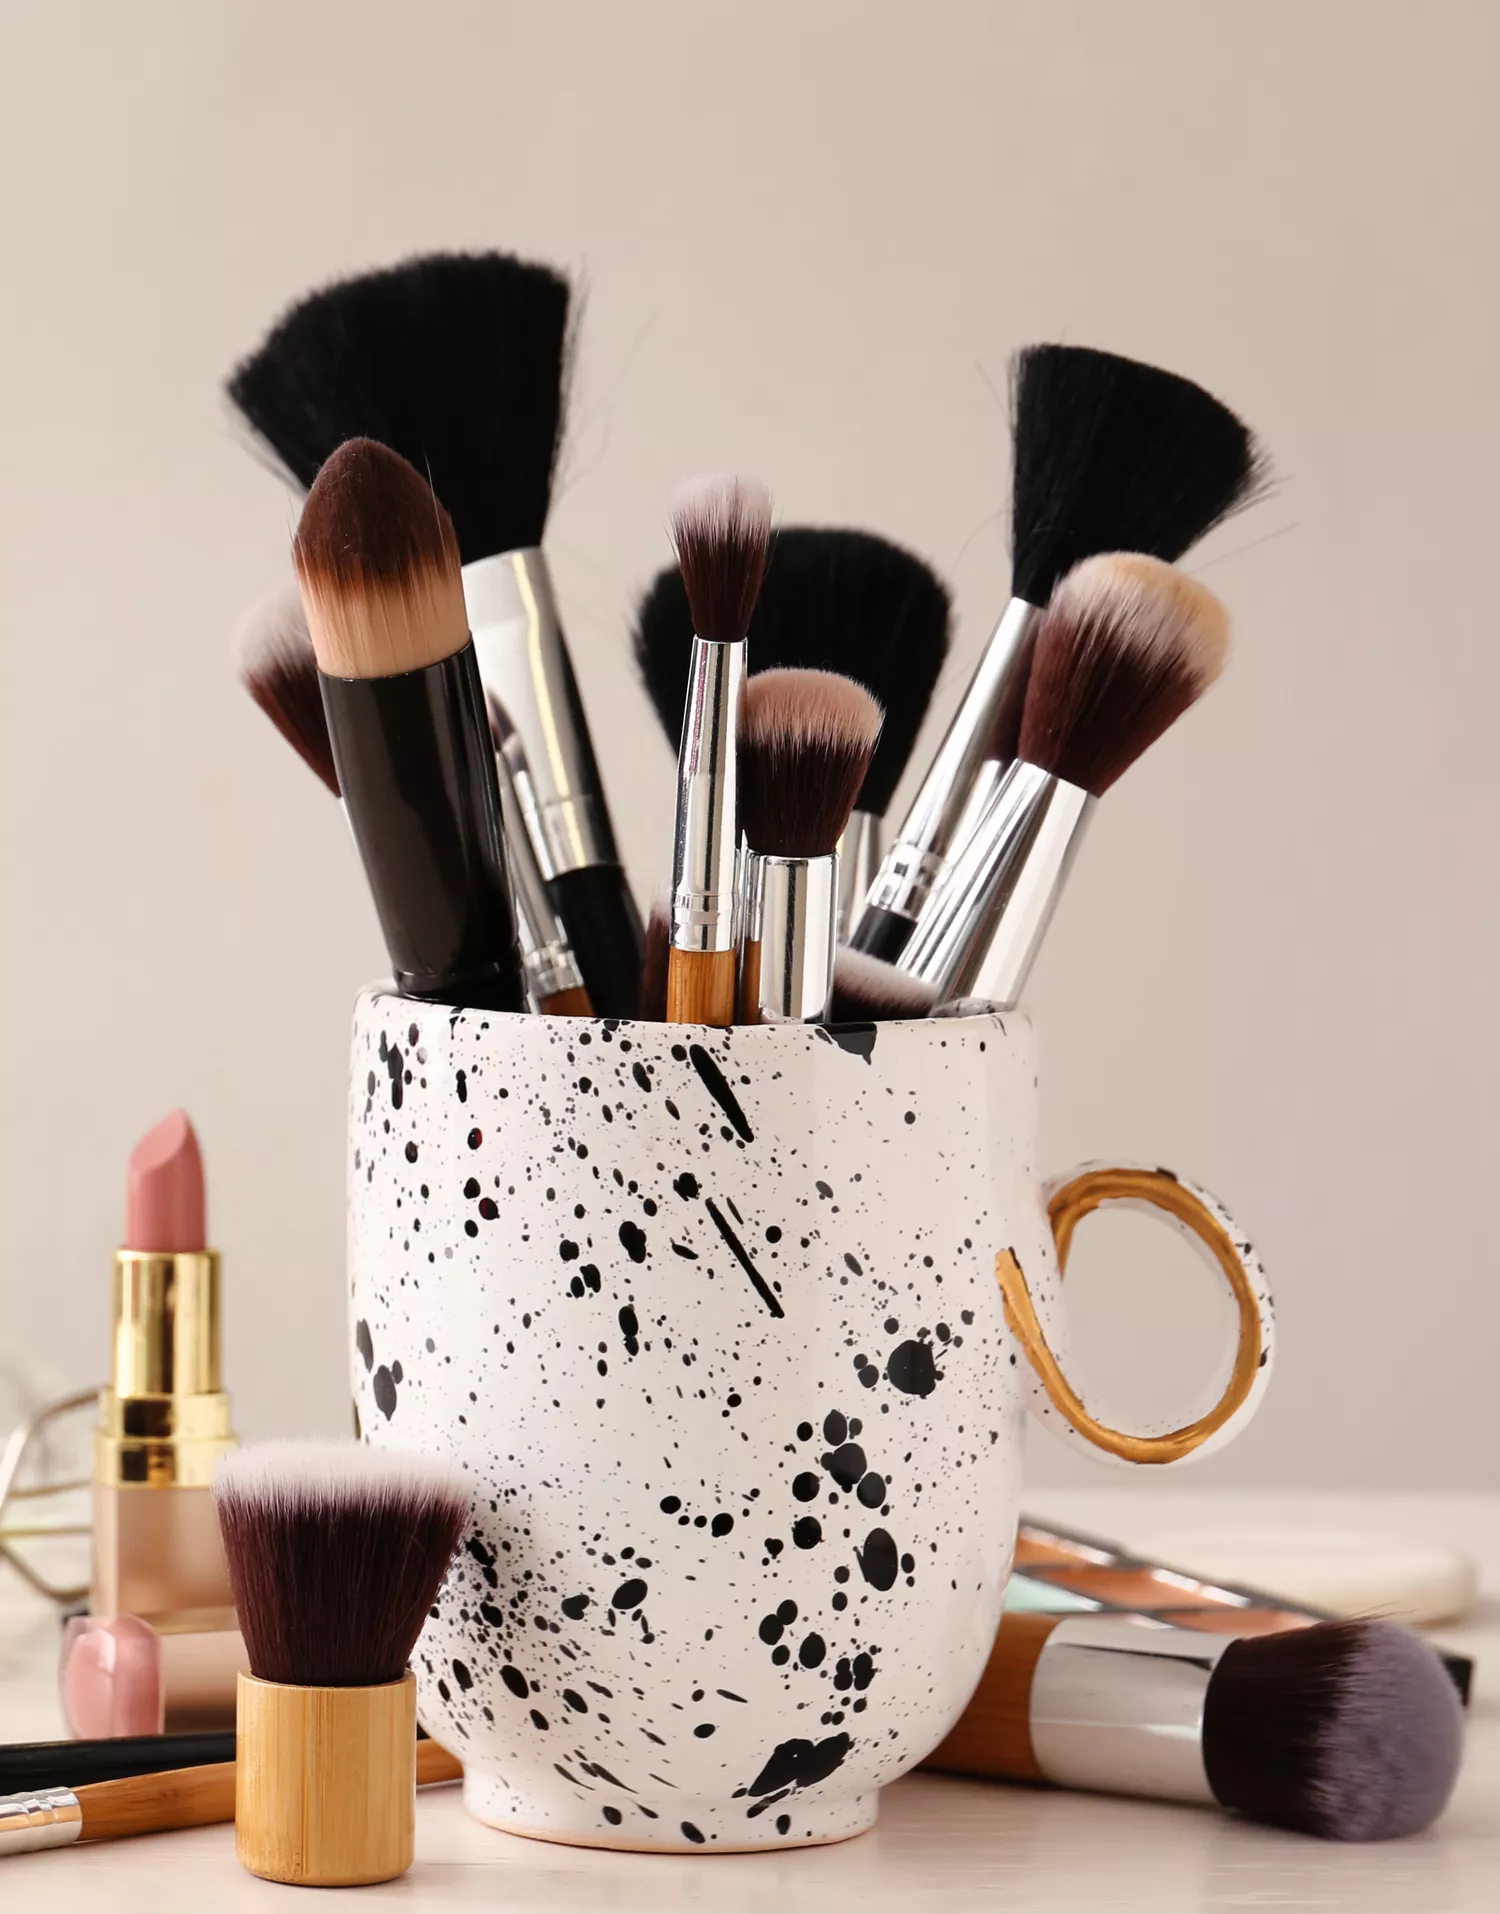 Makeup brushes in coffee cup